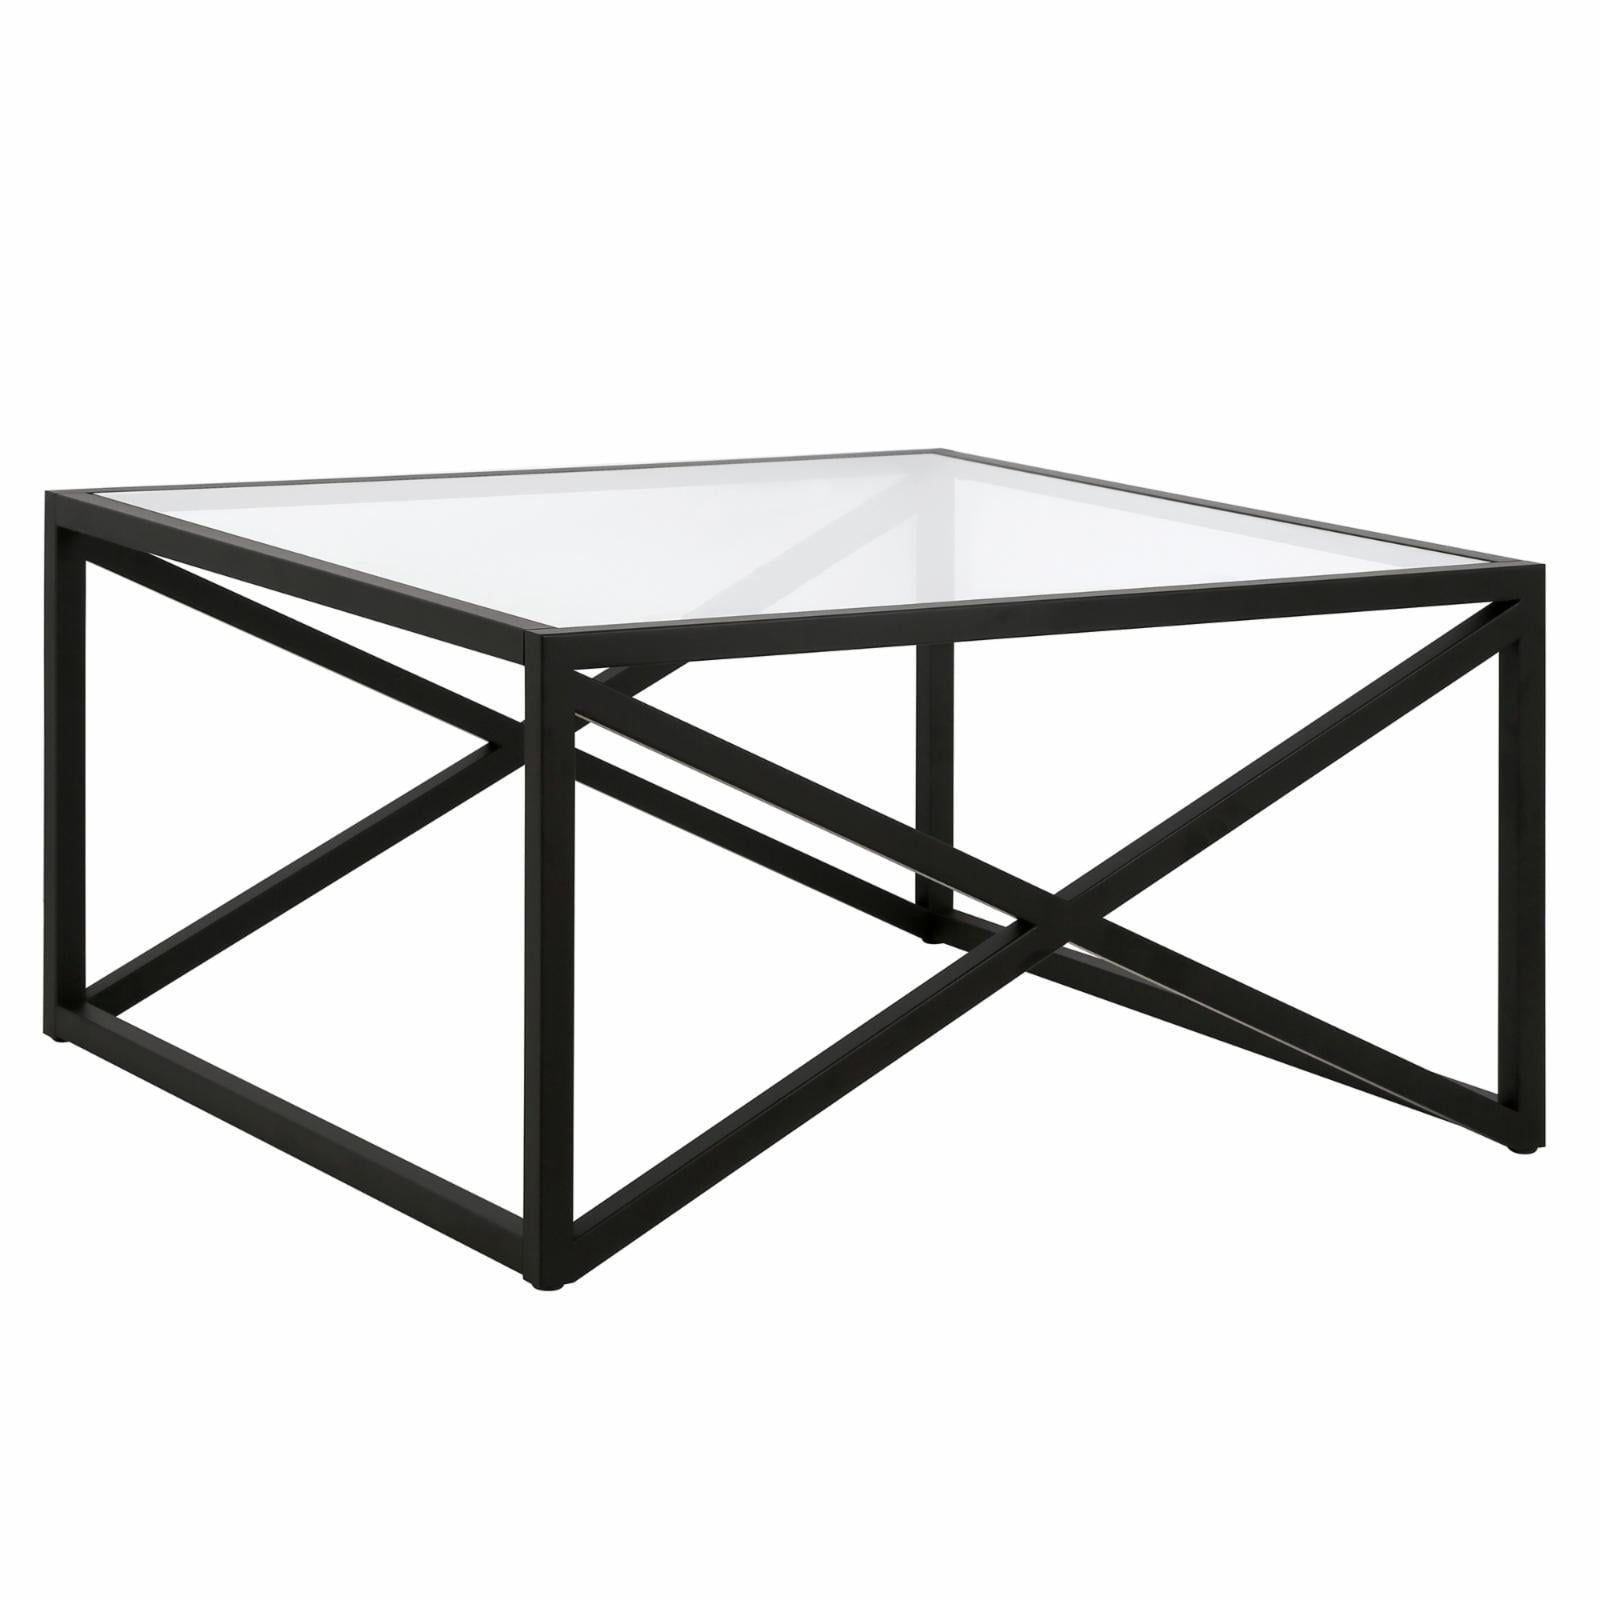 Featured Photo of Addison&Lane Calix Square Tables